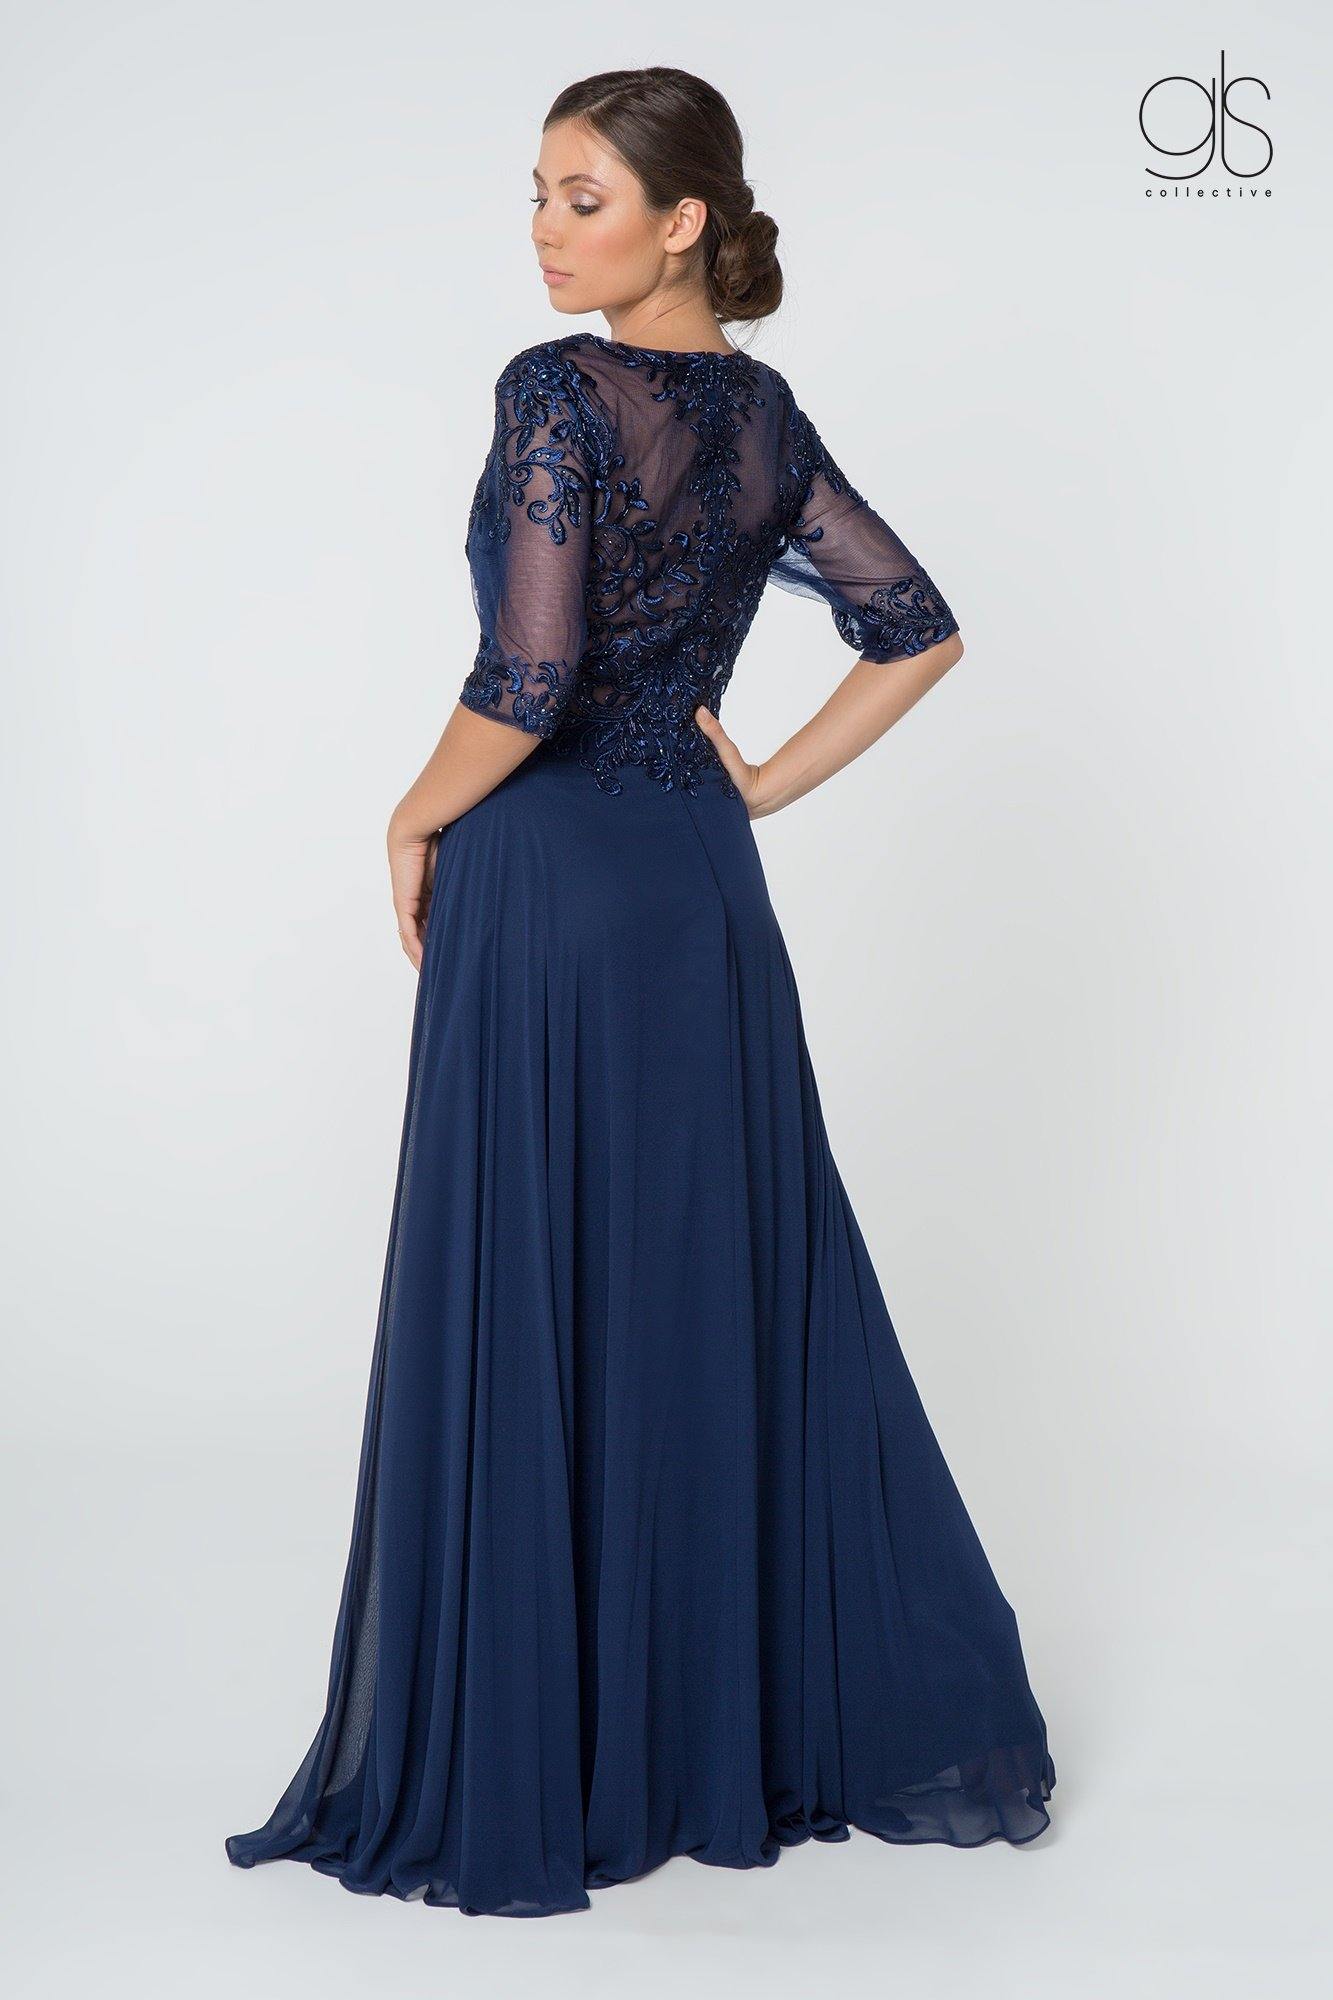 Long Formal Embroidered Mother of the Bride Chiffon Gown - The Dress Outlet Elizabeth K